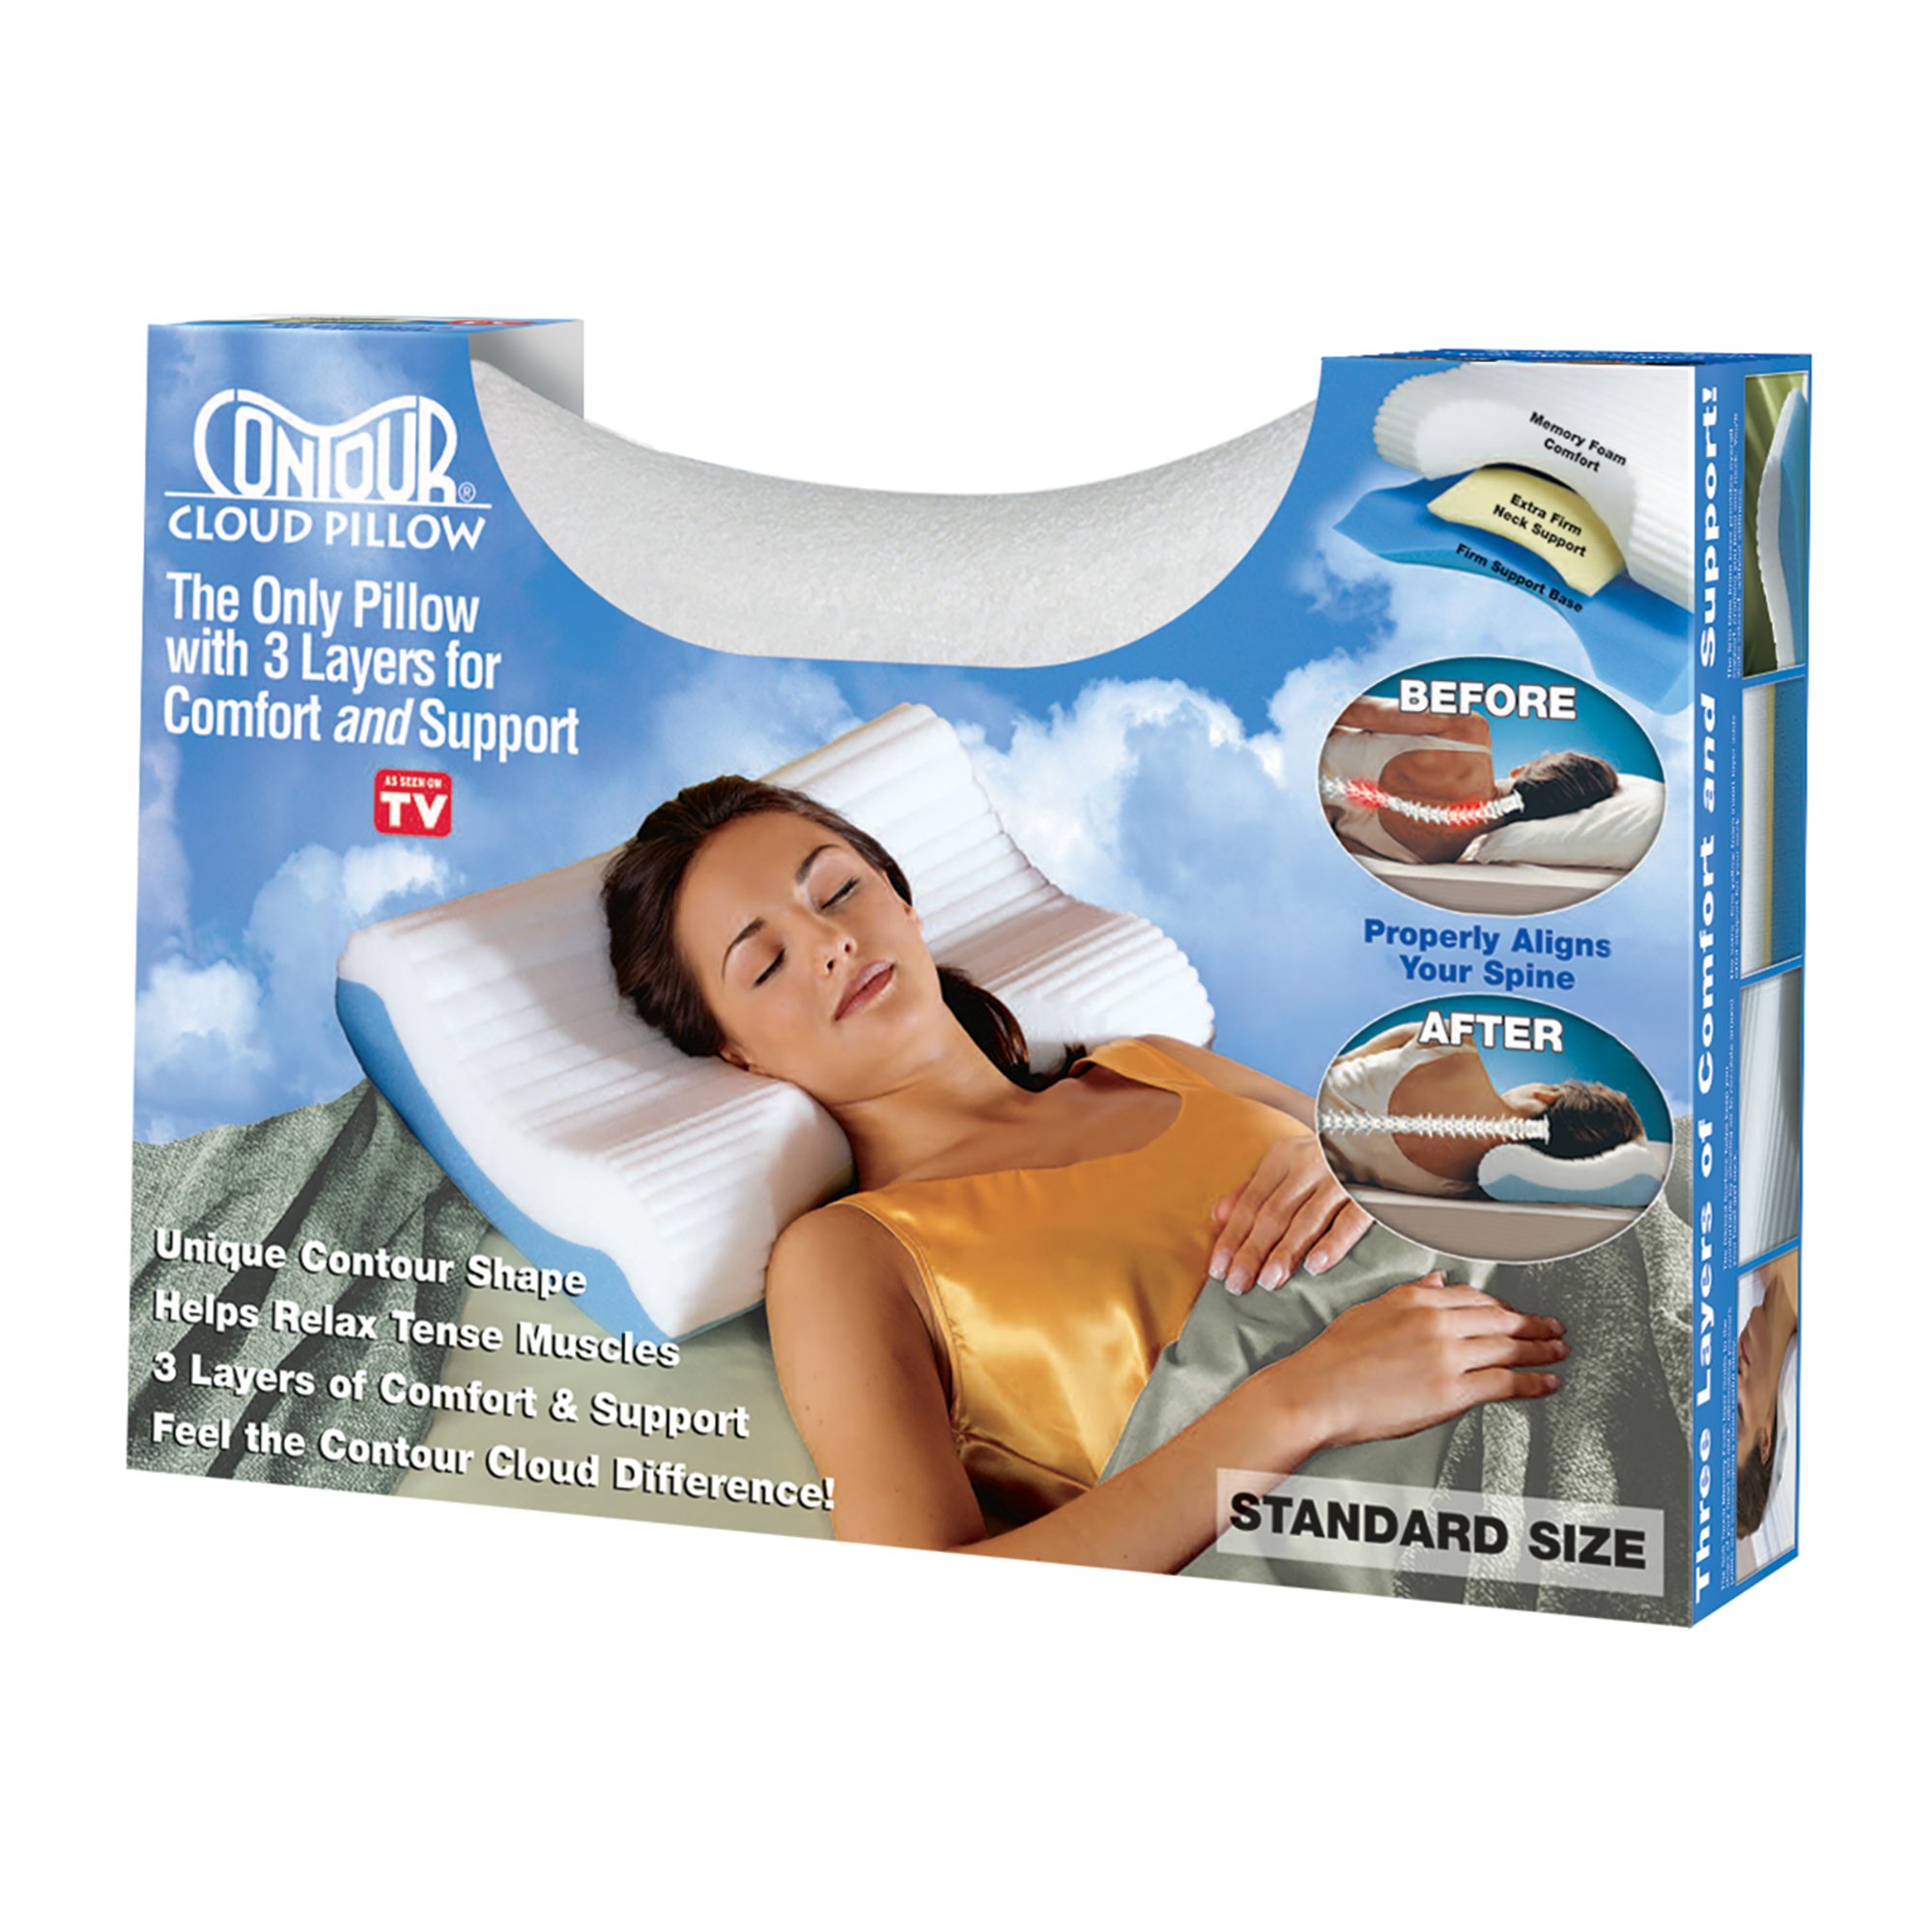 https://www.contourproducts.com/hs-fs/hubfs/13-100R_CloudPillow_Package_angled-HR-1.jpg?width=2000&name=13-100R_CloudPillow_Package_angled-HR-1.jpg